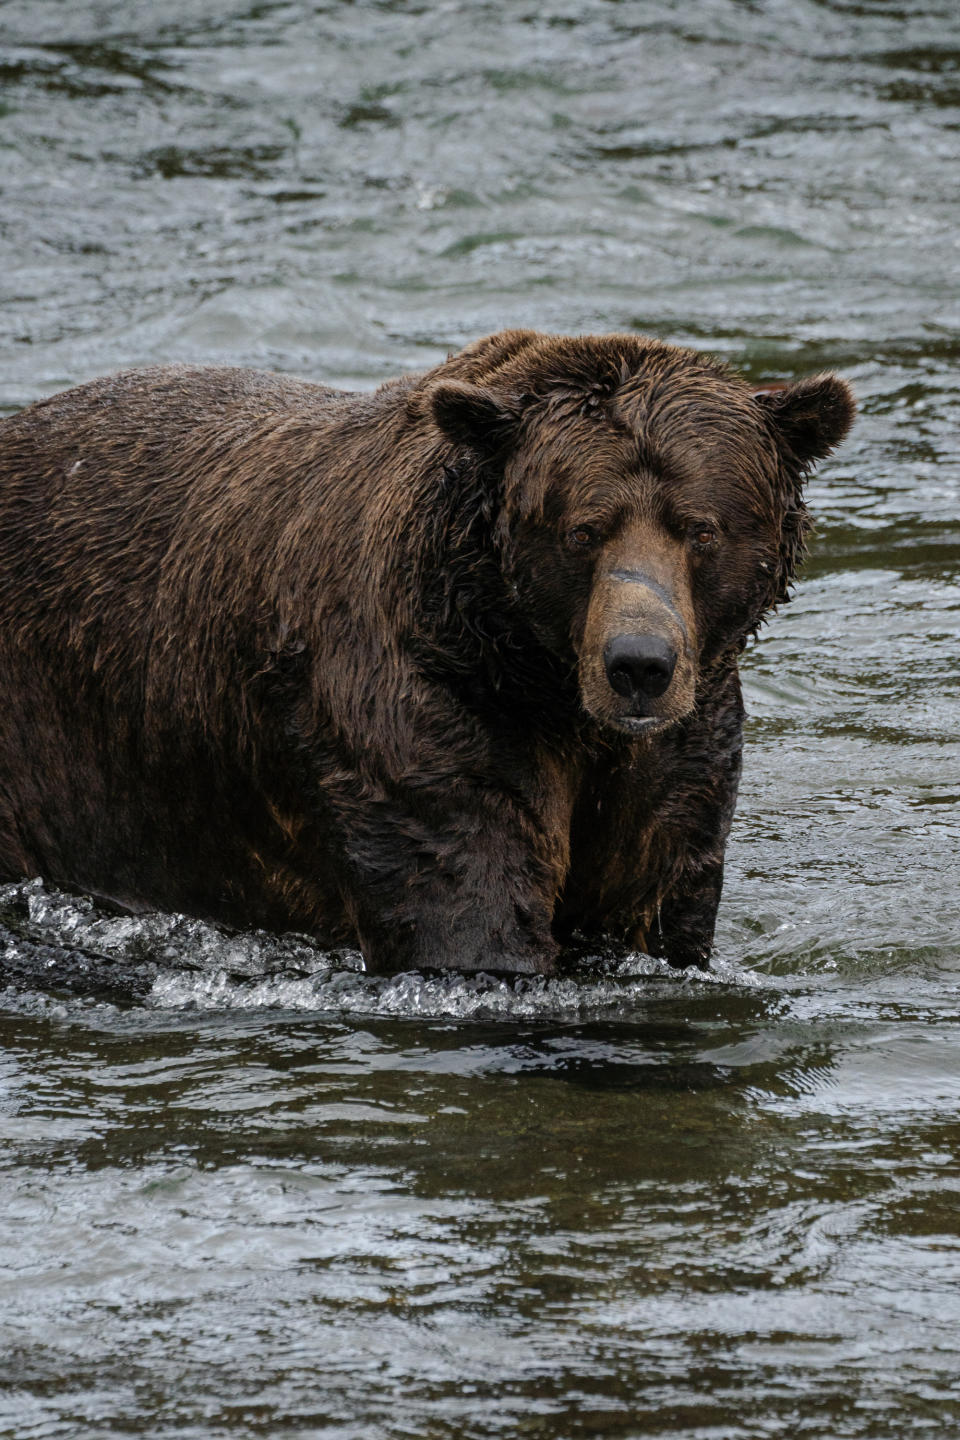 Bear 32, better known as Chunk, walks across Brooks River. (Photo for The Washington Post by Sophie Park)